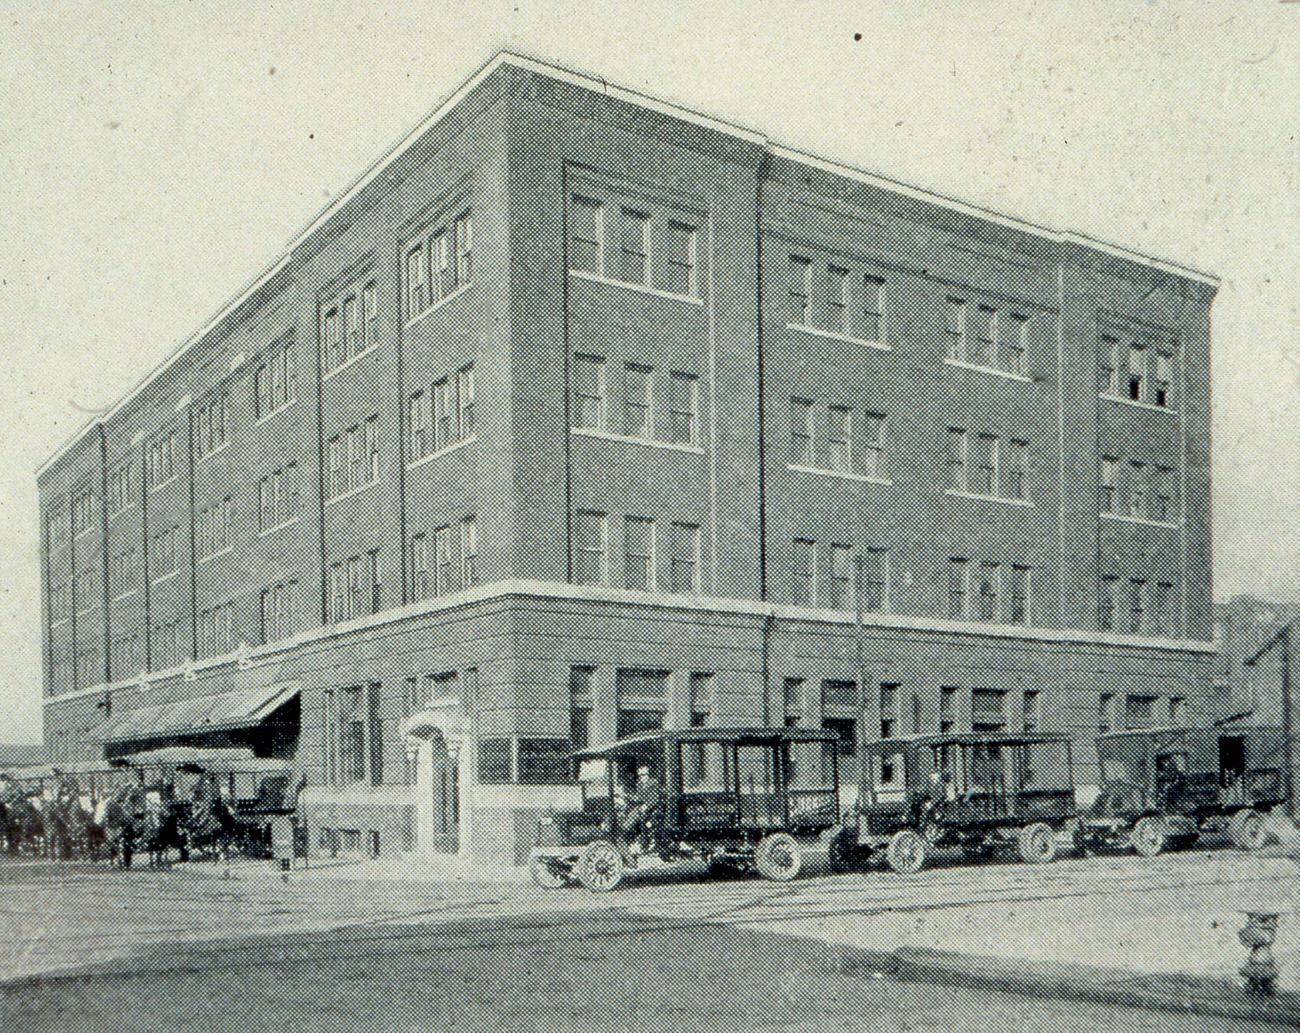 George W Bobb Company, wholesale grocers, operating until 1926. Circa 1919.